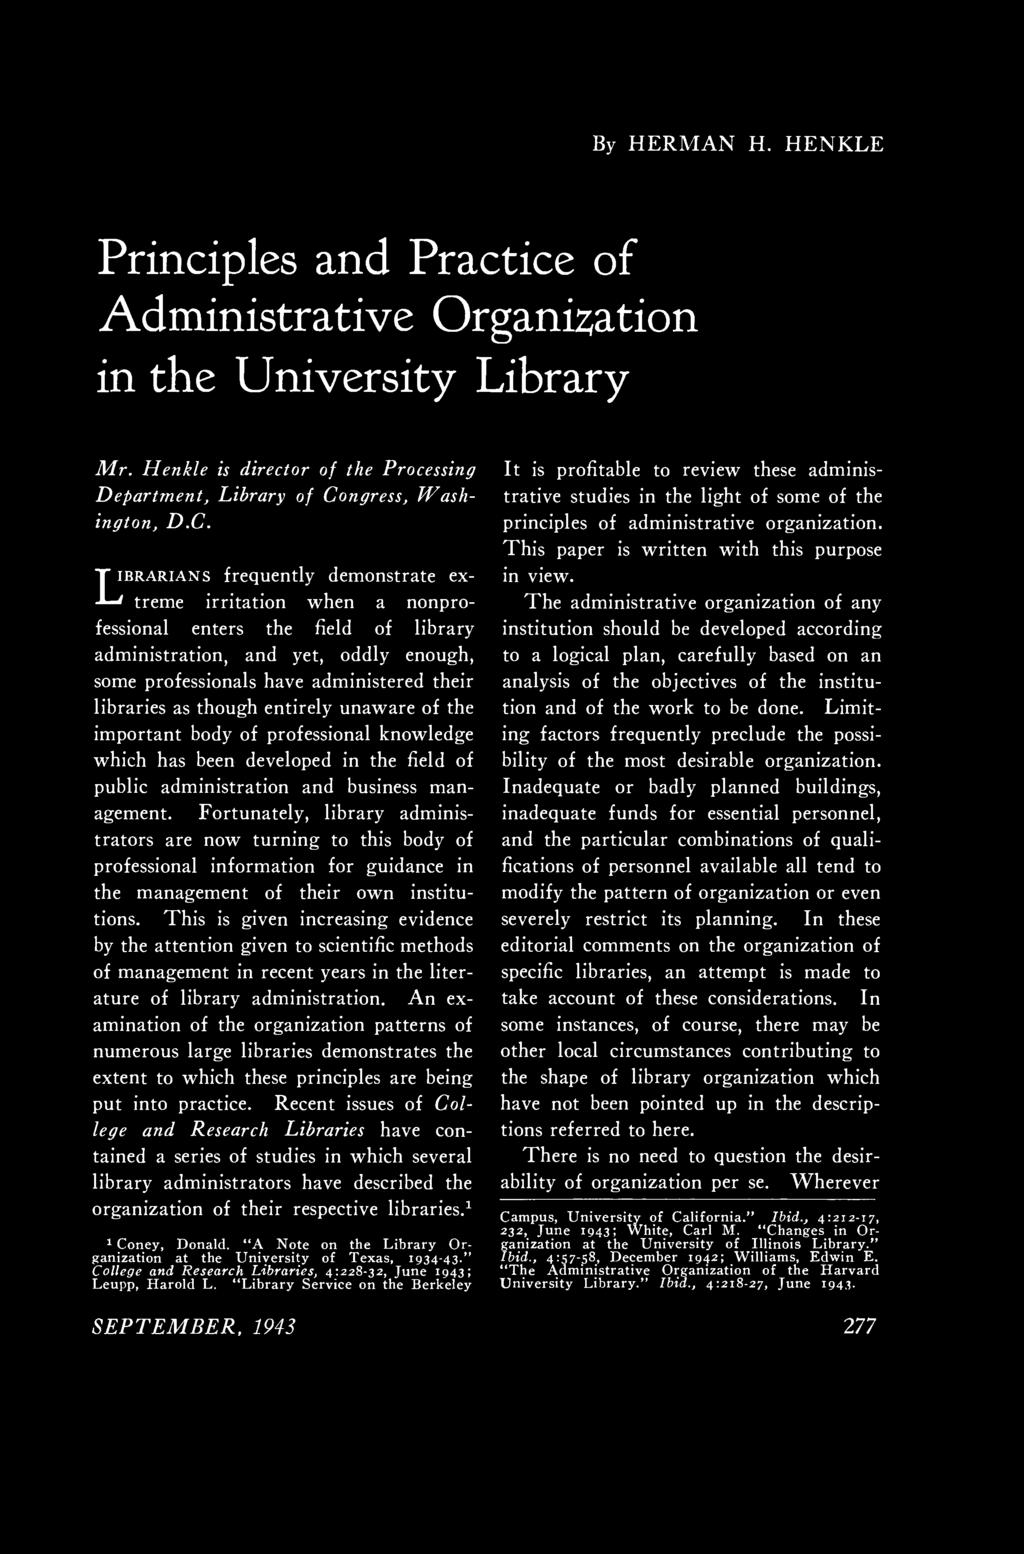 This is given increasing evidence by the attention given to scientific methods of management in recent years in the literature of library administration.